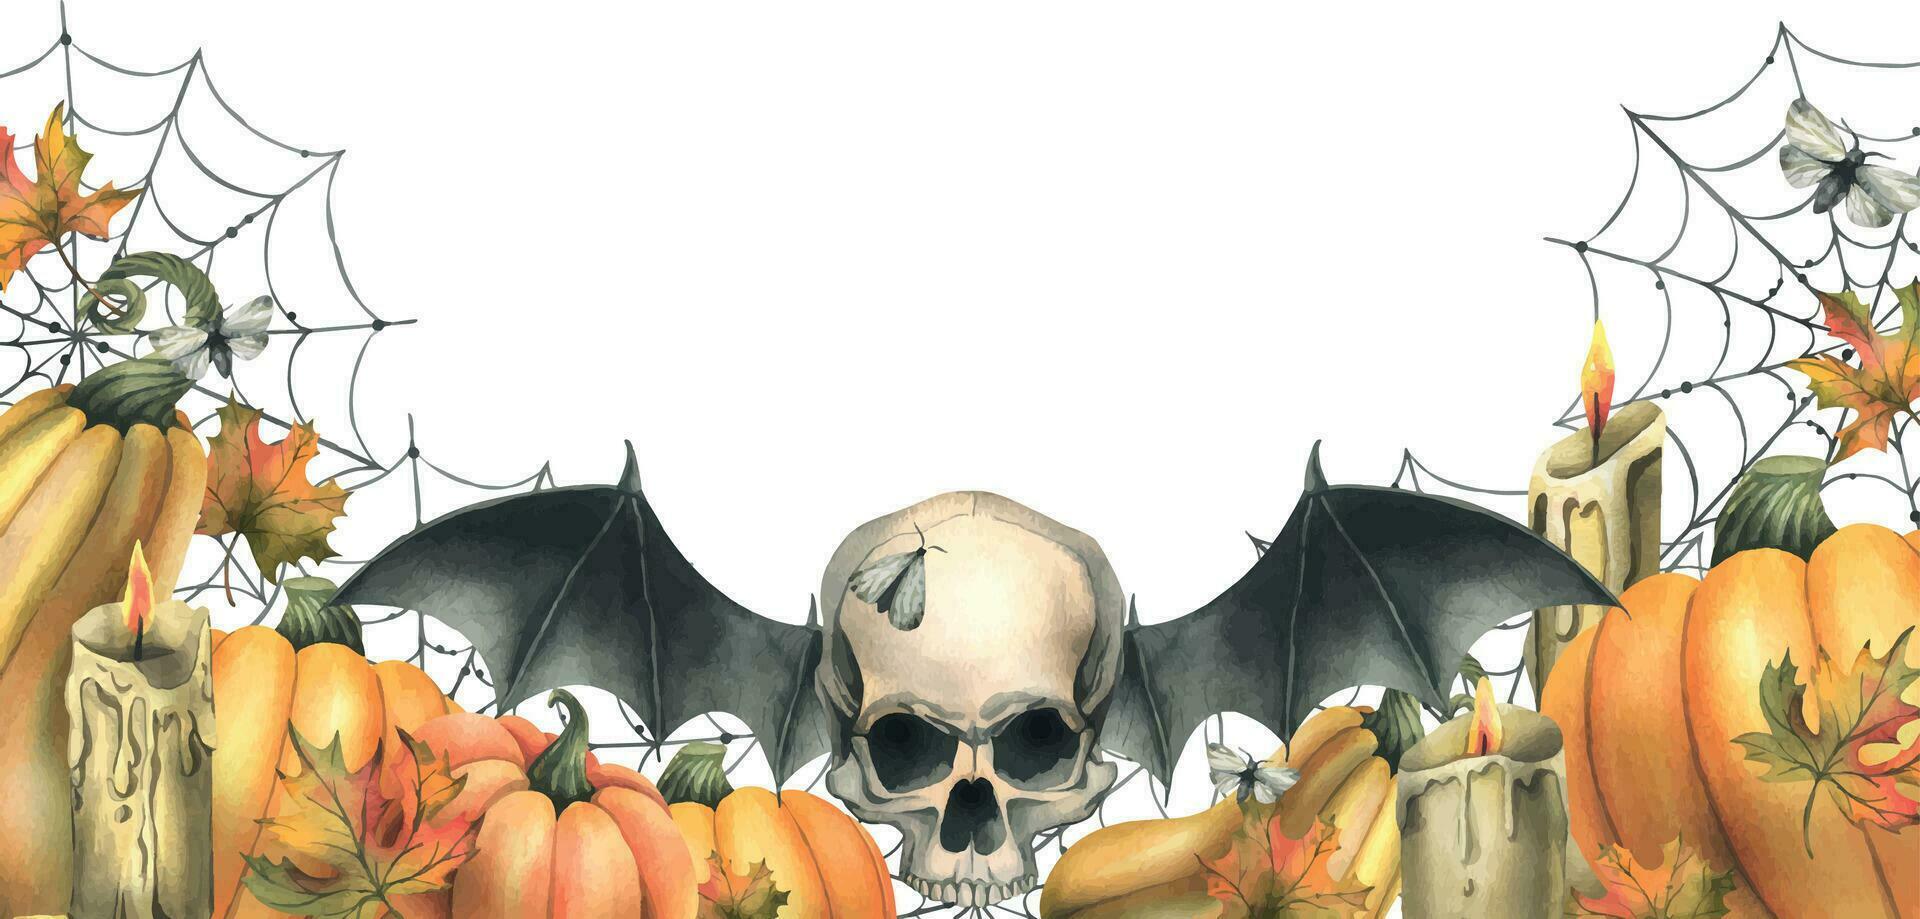 Human skull with bat wings, orange pumpkins, cobwebs, candles and autumn maple leaves. Hand drawn watercolor illustration for Halloween. Frame, template on white background vector